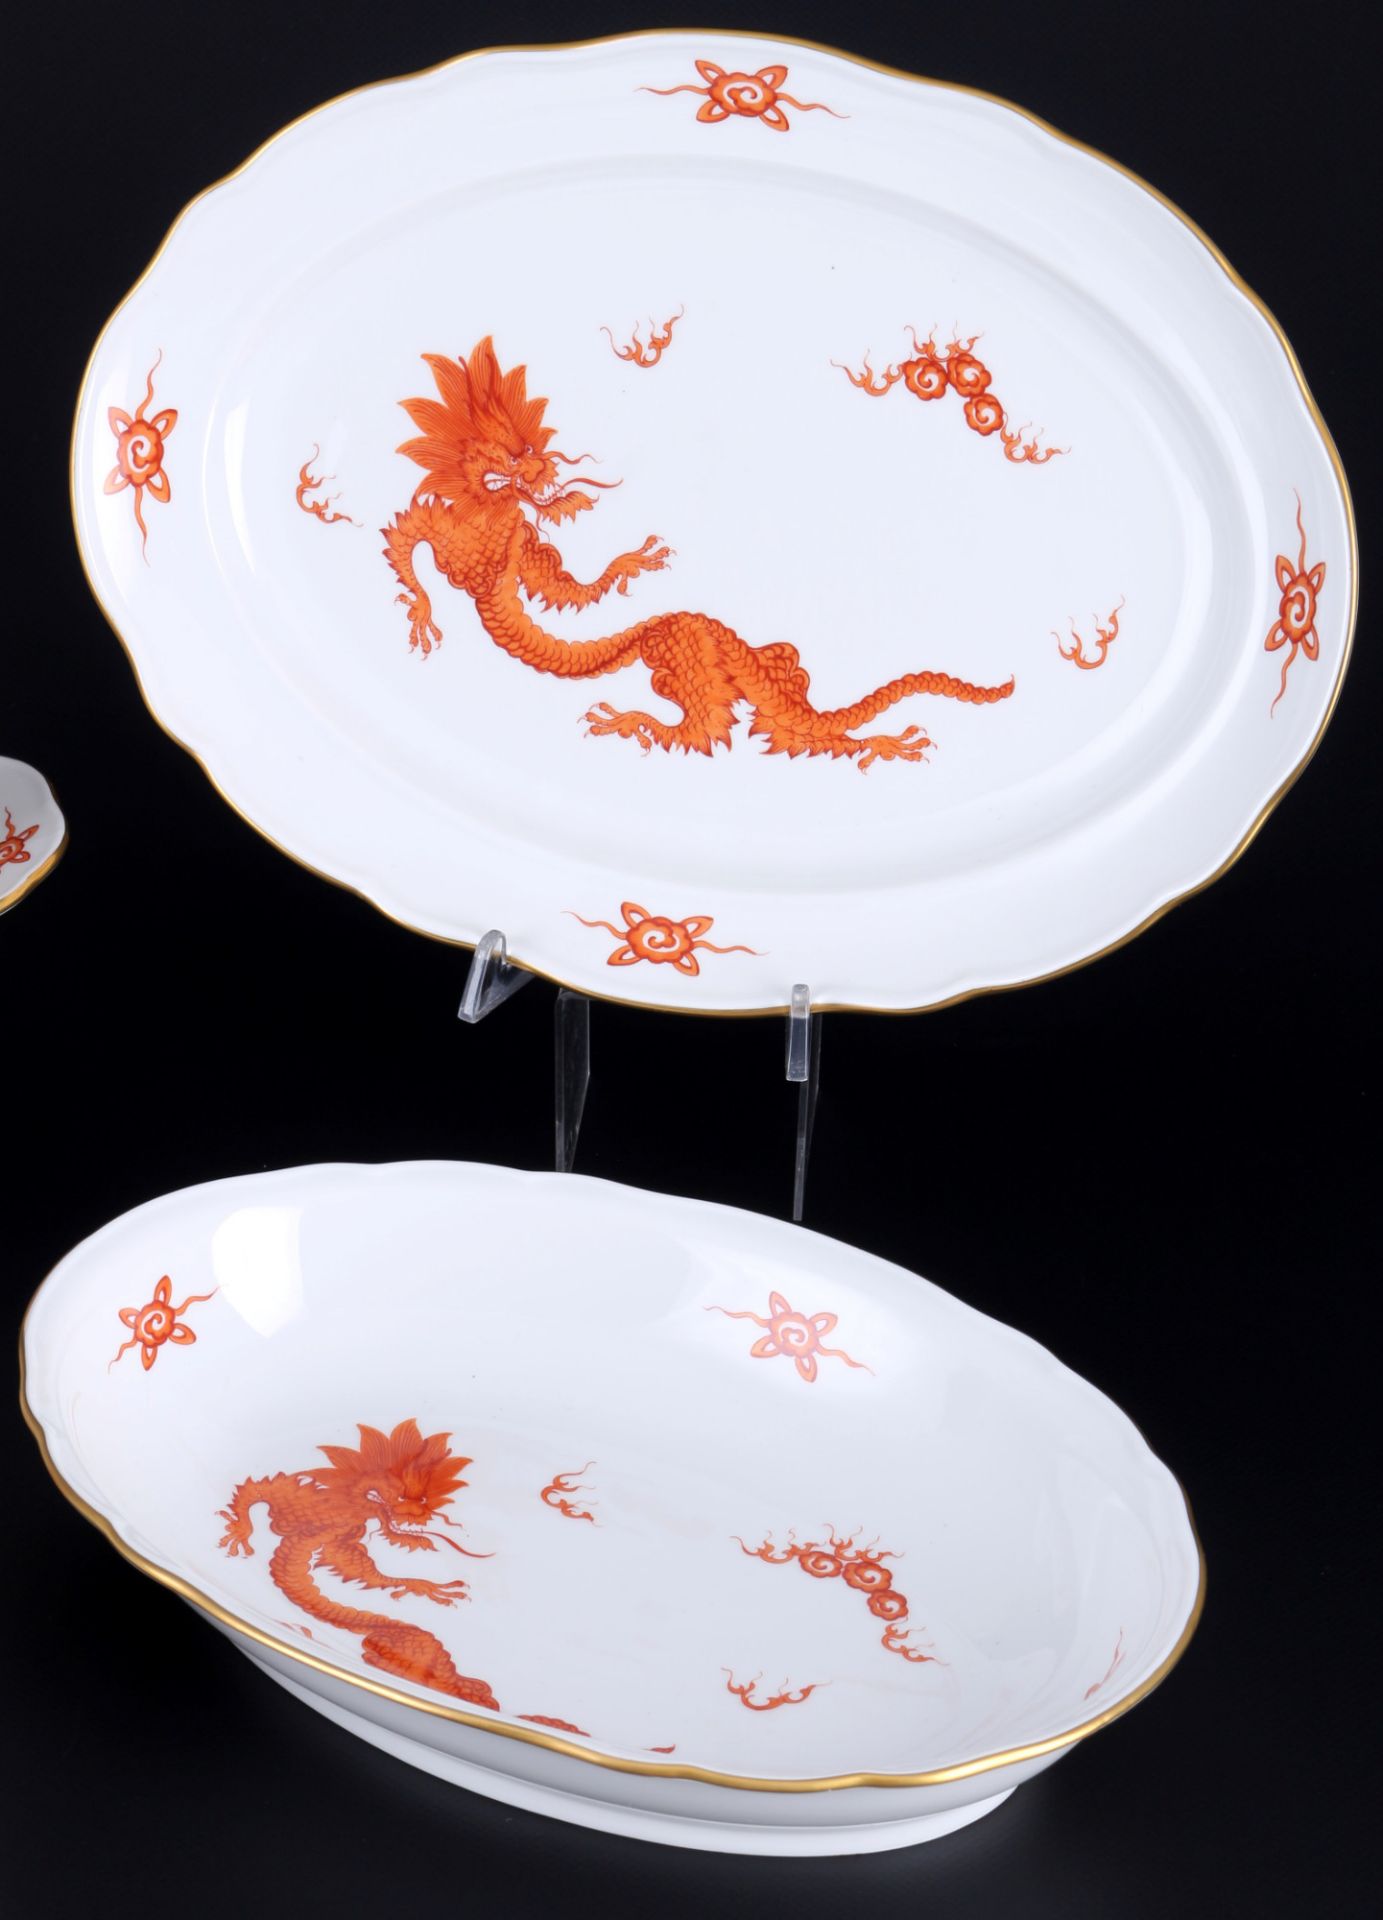 Meissen Red Ming Dragon dinner service for 6 persons 1st choice, Speiseservice für 6 Personen 1.Wahl - Image 4 of 5